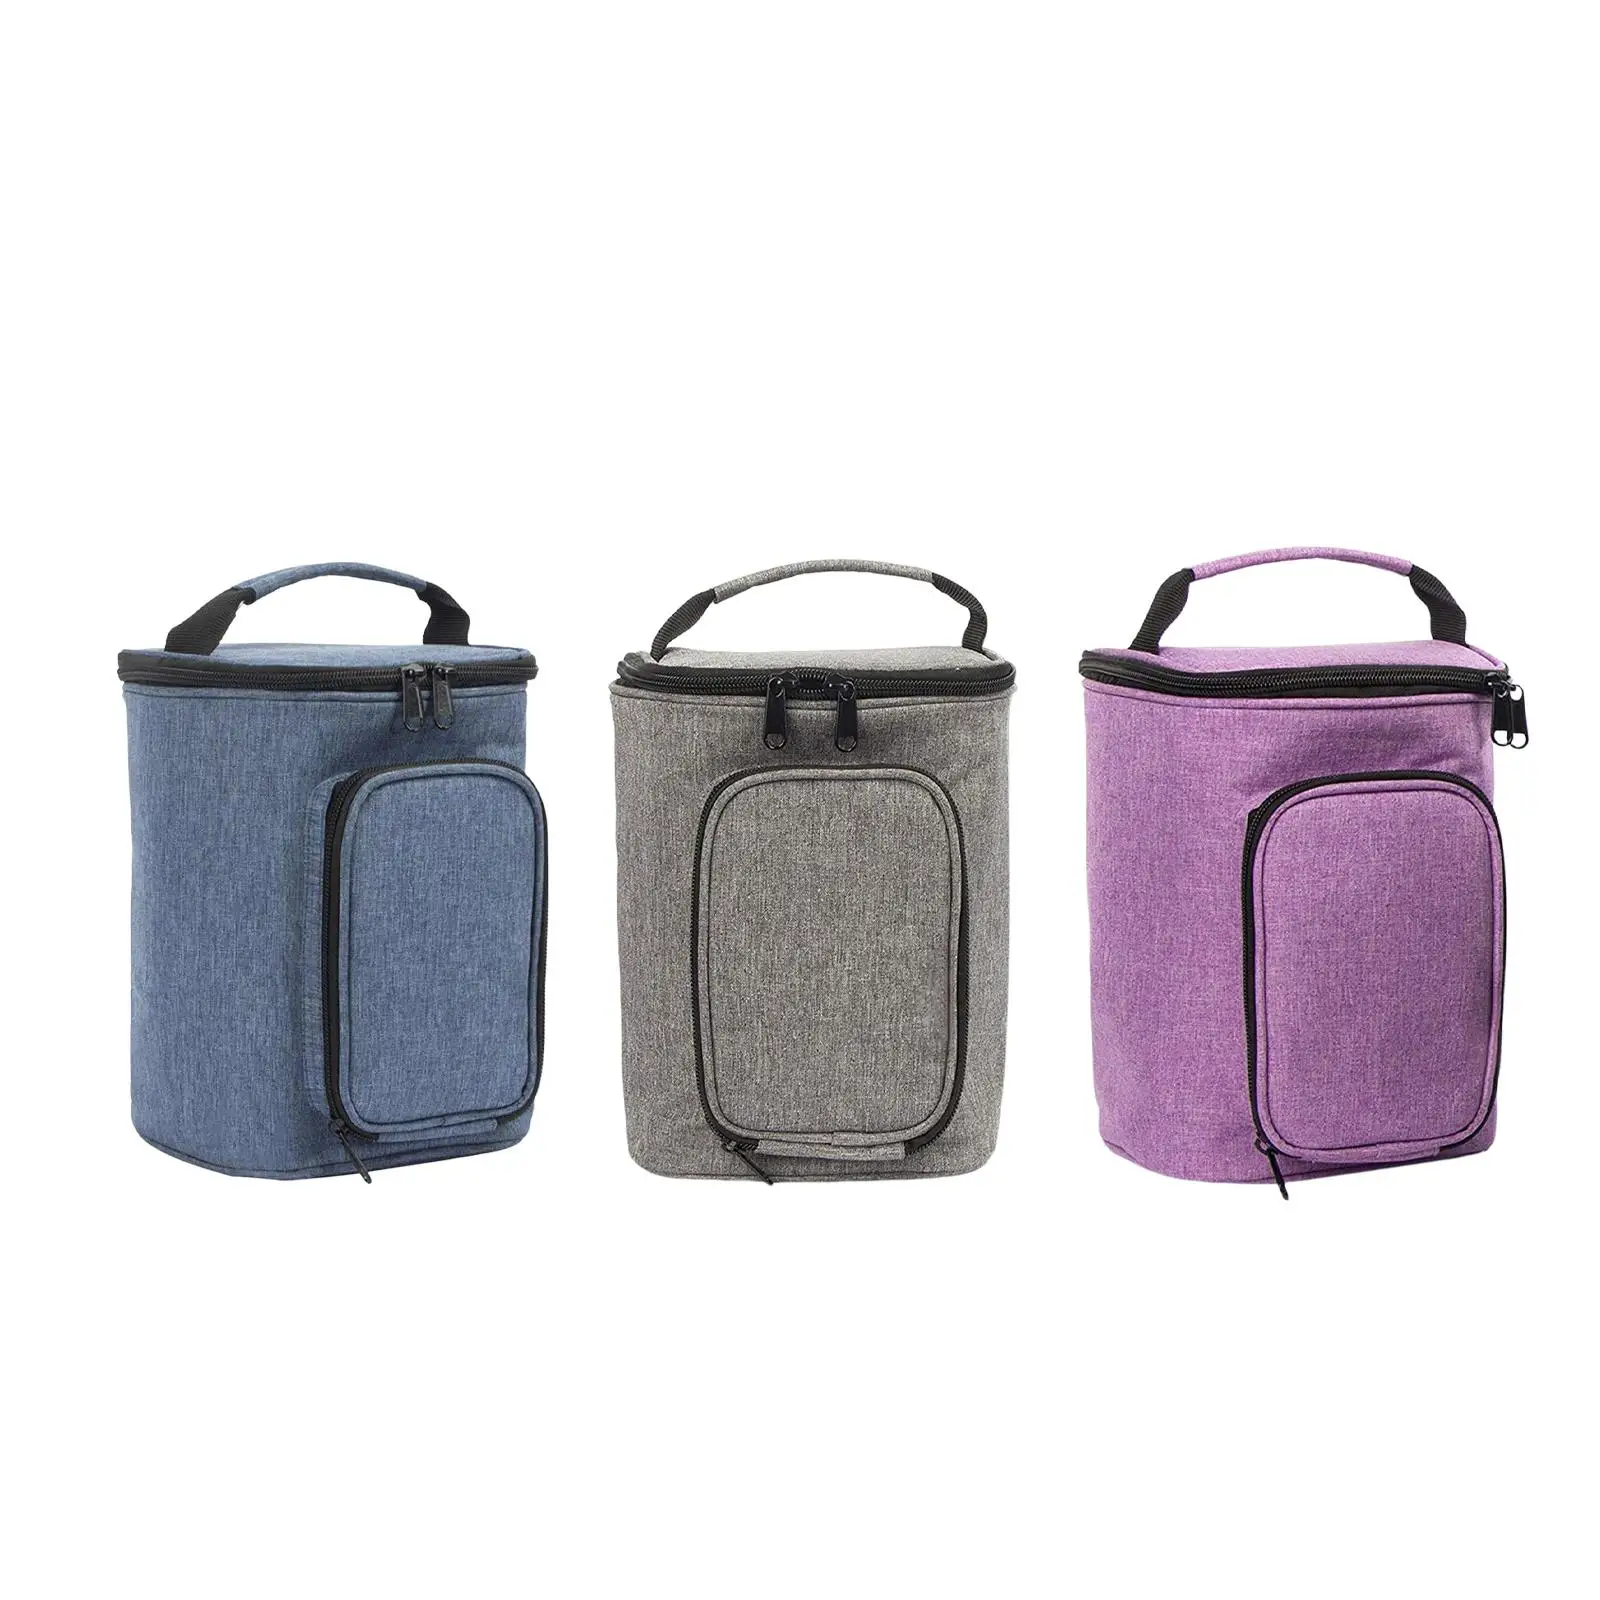 Carrying Storage Bag for Water Flosser with Small Mesh Pocket Oxford Cloth Accessory Water Flosser Storage Bag Cosmetic Bag